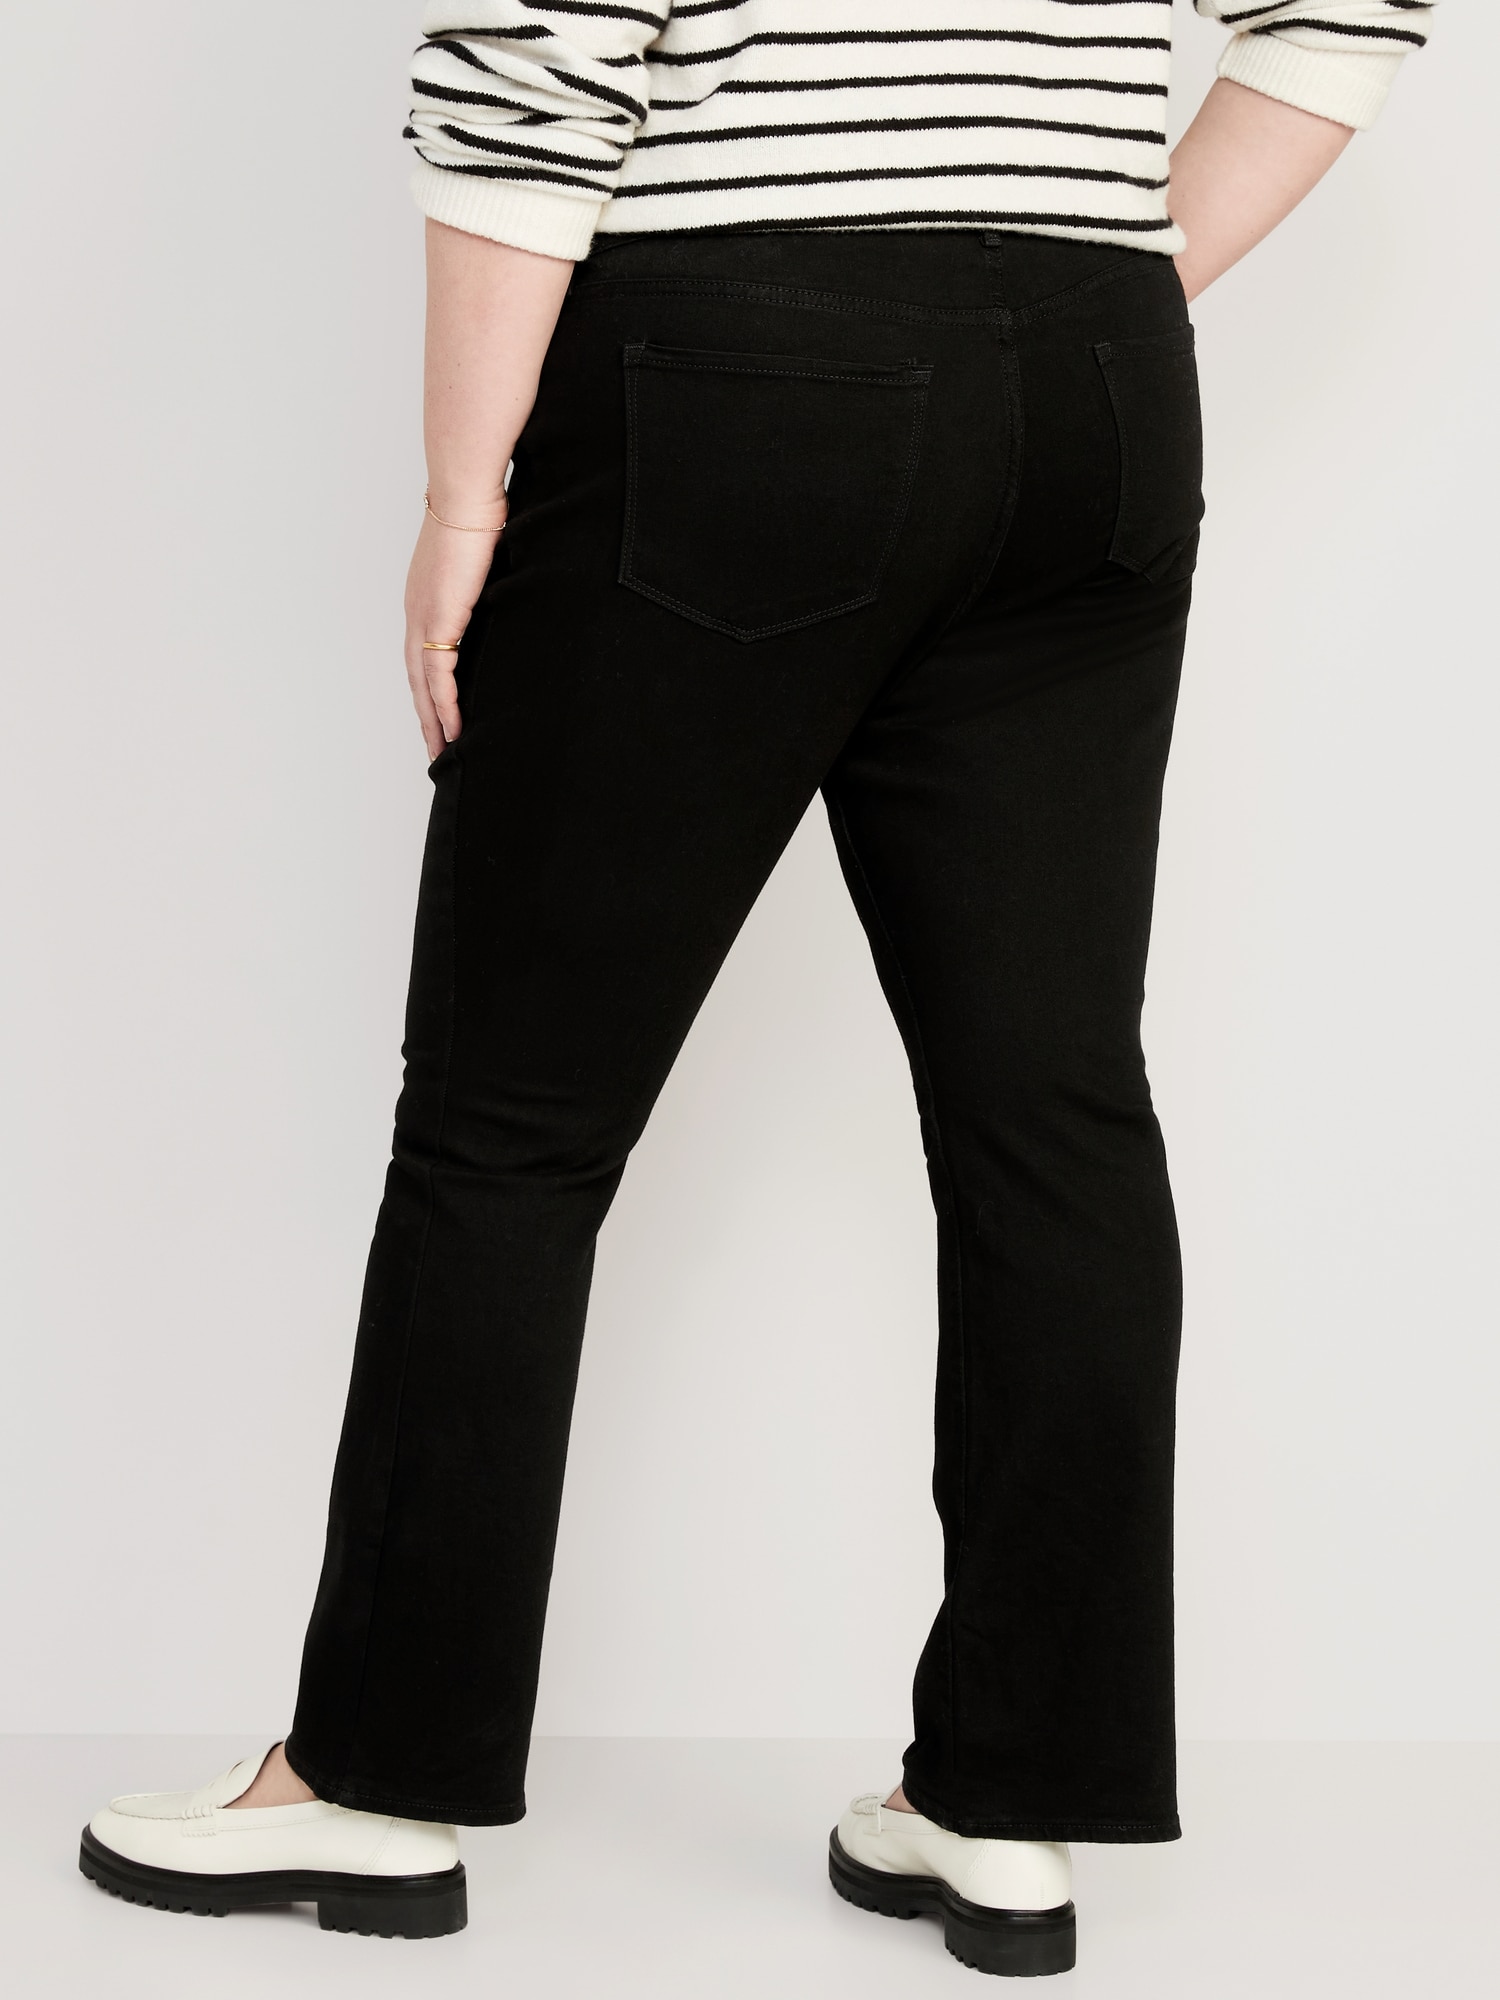 Womens Black Jeans Bootcut Stretch Denim Pants NEW Hipster Size 6 8 10 12 14